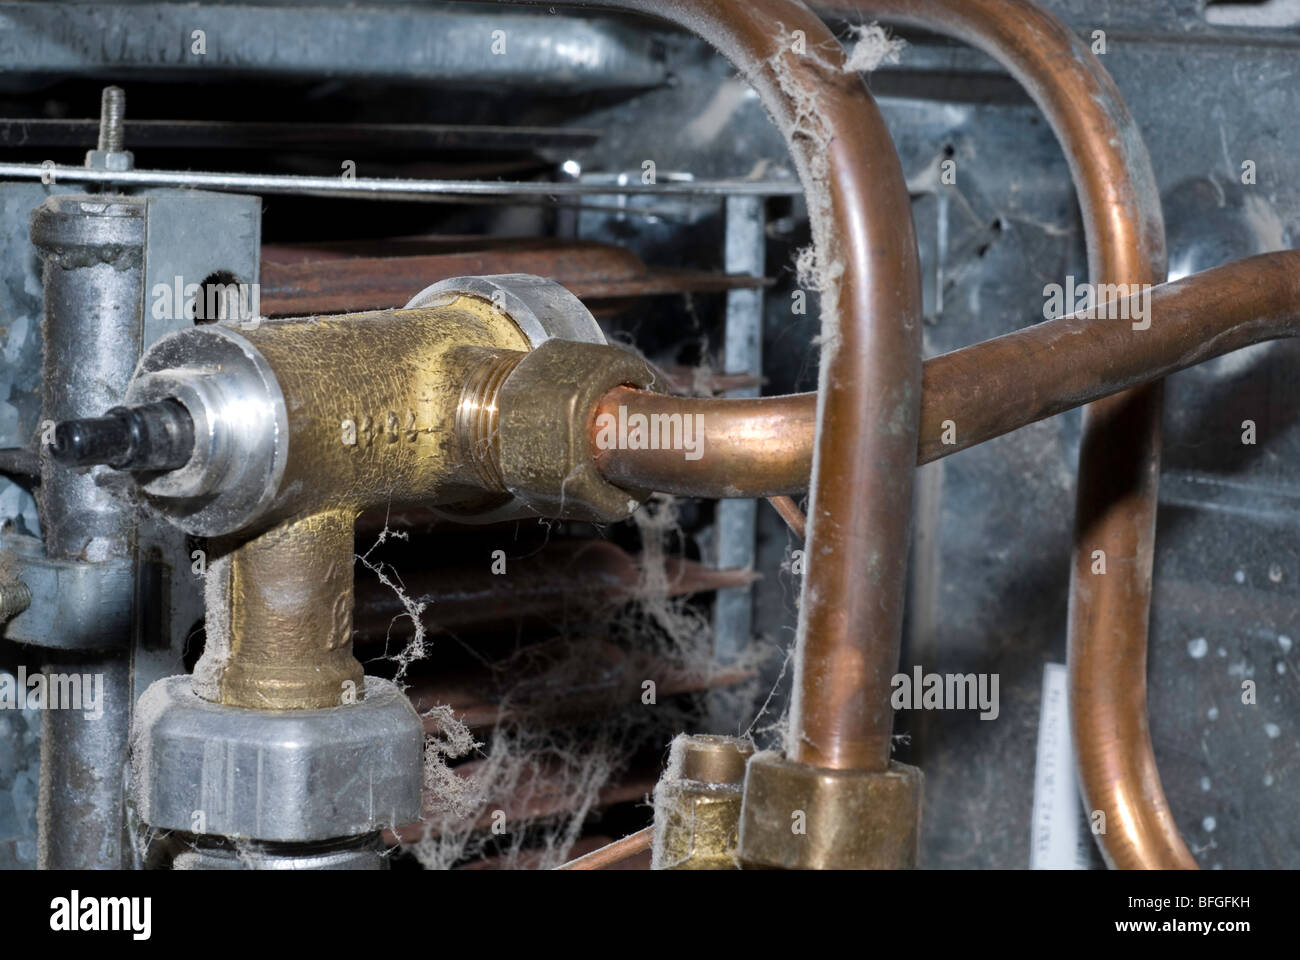 old dusty gas water heater, inside view Stock Photo